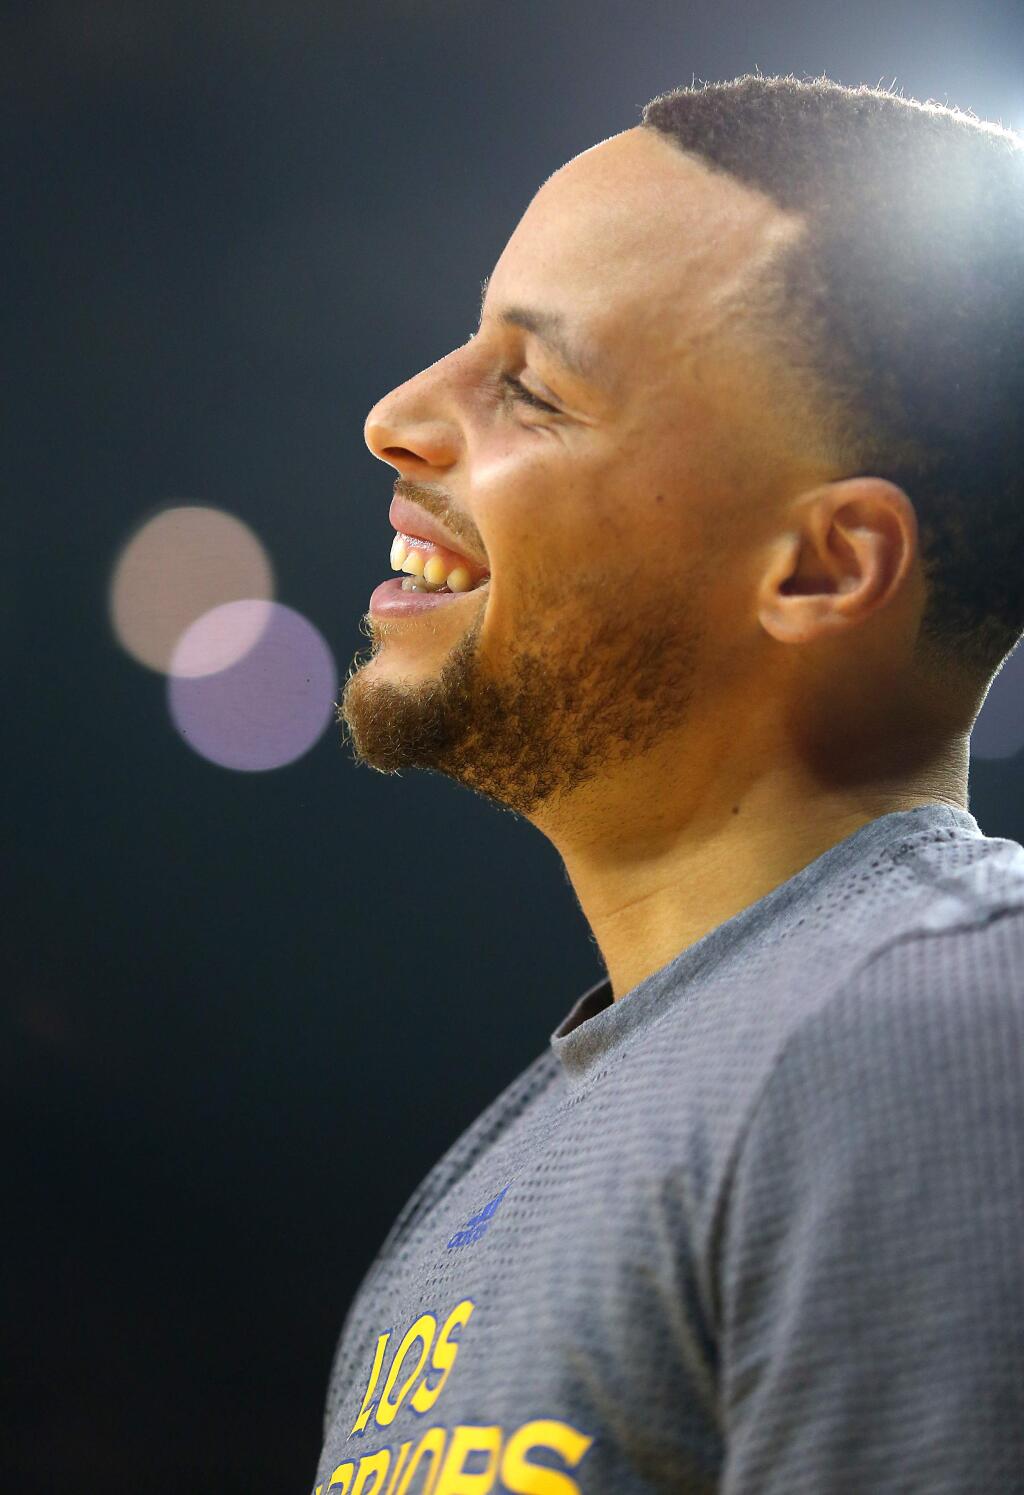 Golden State Warriors guard Stephen Curry laughs during warmups before facing the Boston Celtics in Oakland on Wednesday, March 8. (Christopher Chung/ The Press Democrat)